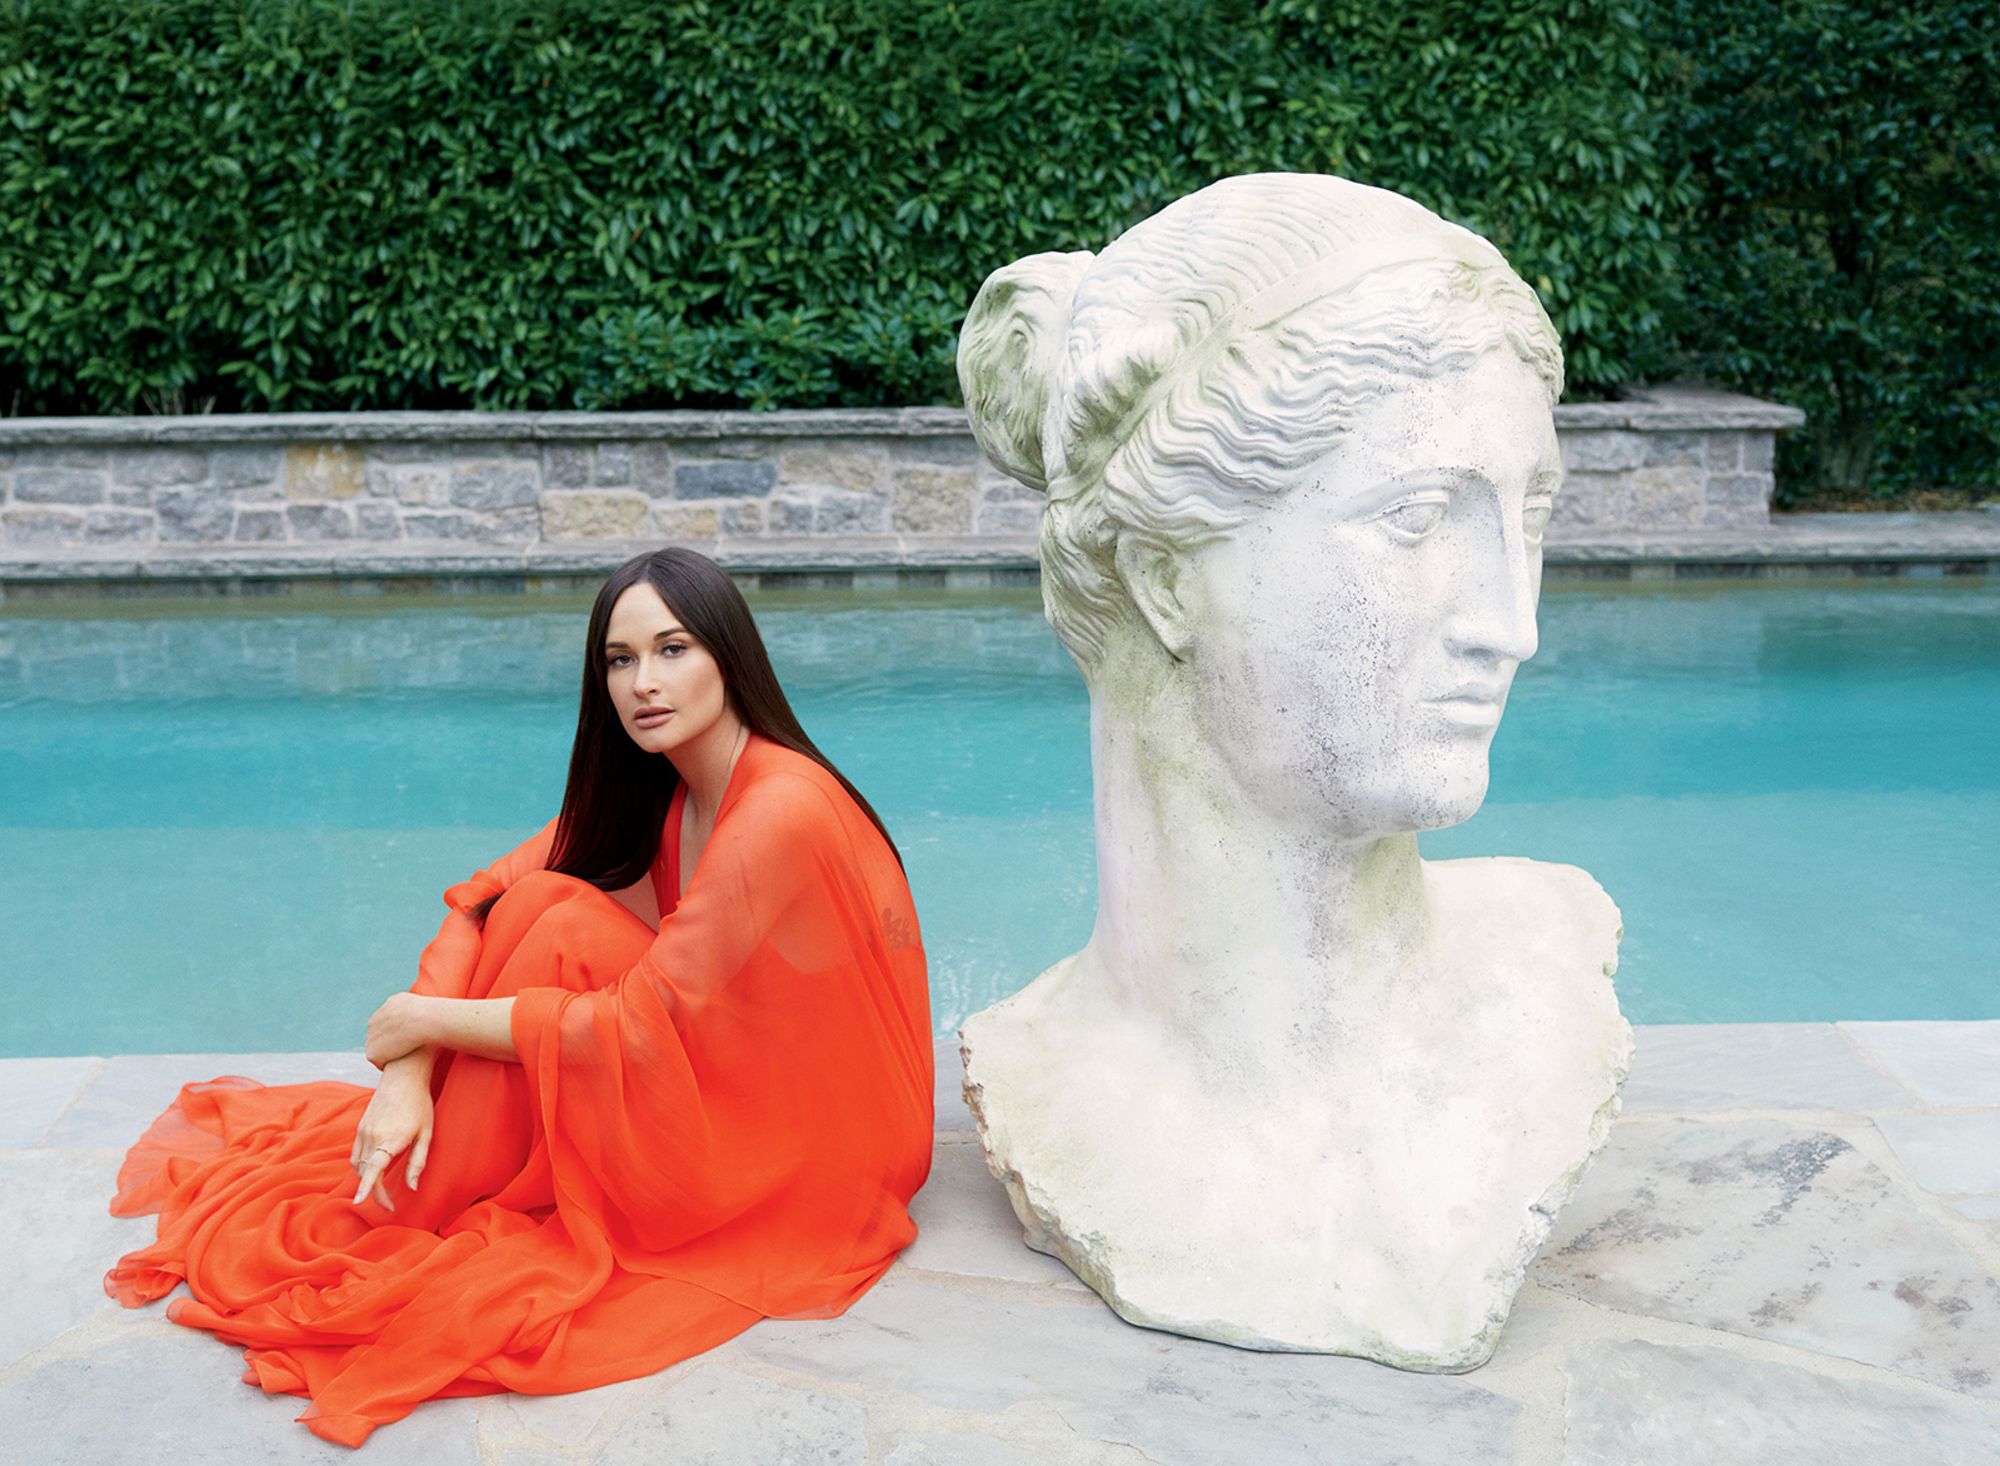 01 Kacey Musgraves architectural digest may